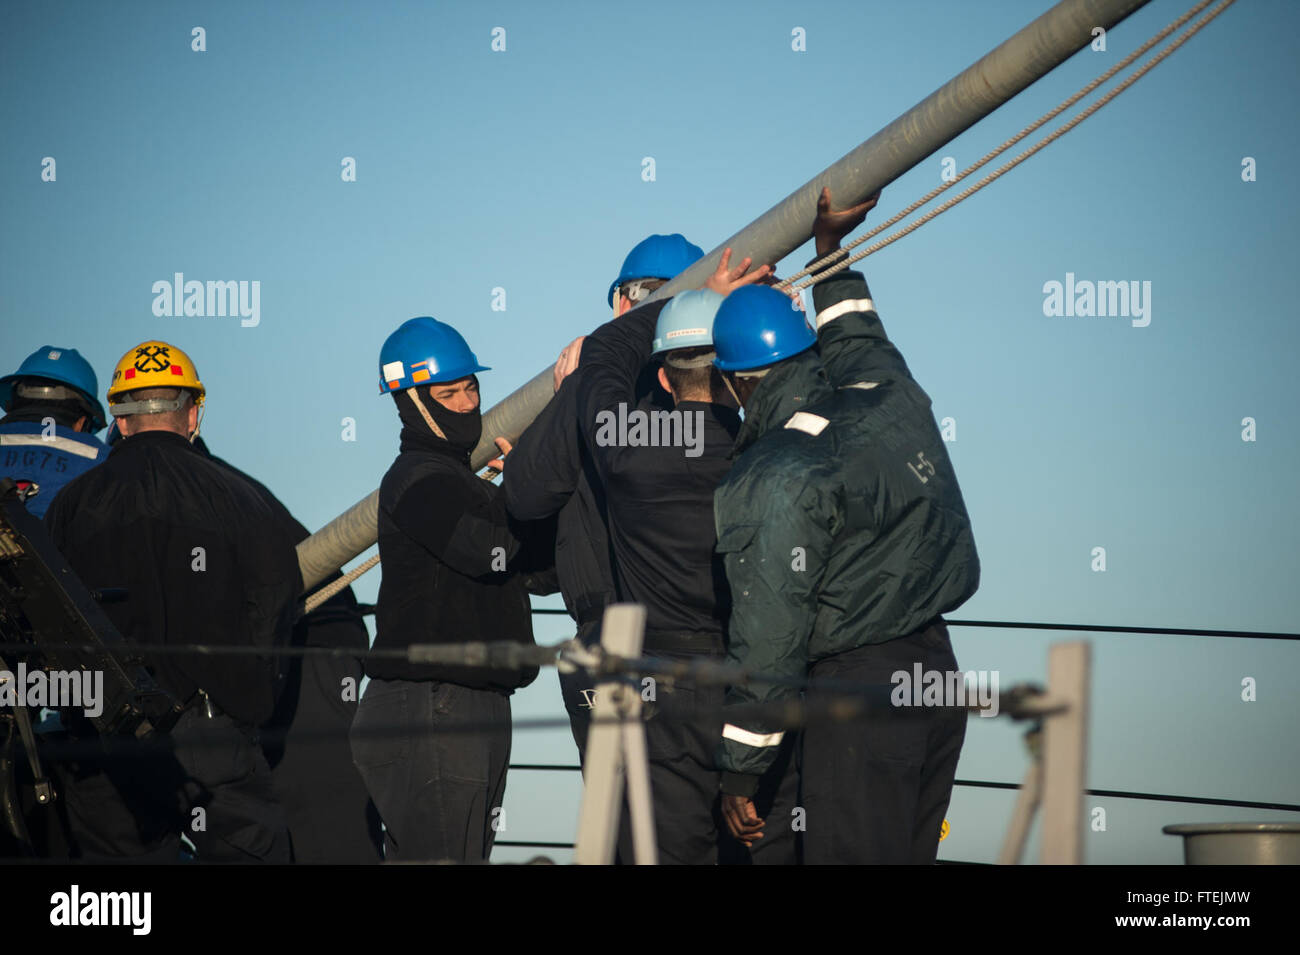 MEDITERRANEAN SEA (Dec. 20, 2014) Sailors assigned to USS Donald Cook (DDG 75), mount the flagstaff as the ship prepares to pull in to Augusta Bay for a port visit Dec. 20, 2014. Donald Cook, an Arleigh Burke-class guided-missile destroyer, forward-deployed to Rota, Spain, is conducting naval operations in the U.S. 6th Fleet area of operations in support of U.S. national security interests in Europe. Stock Photo